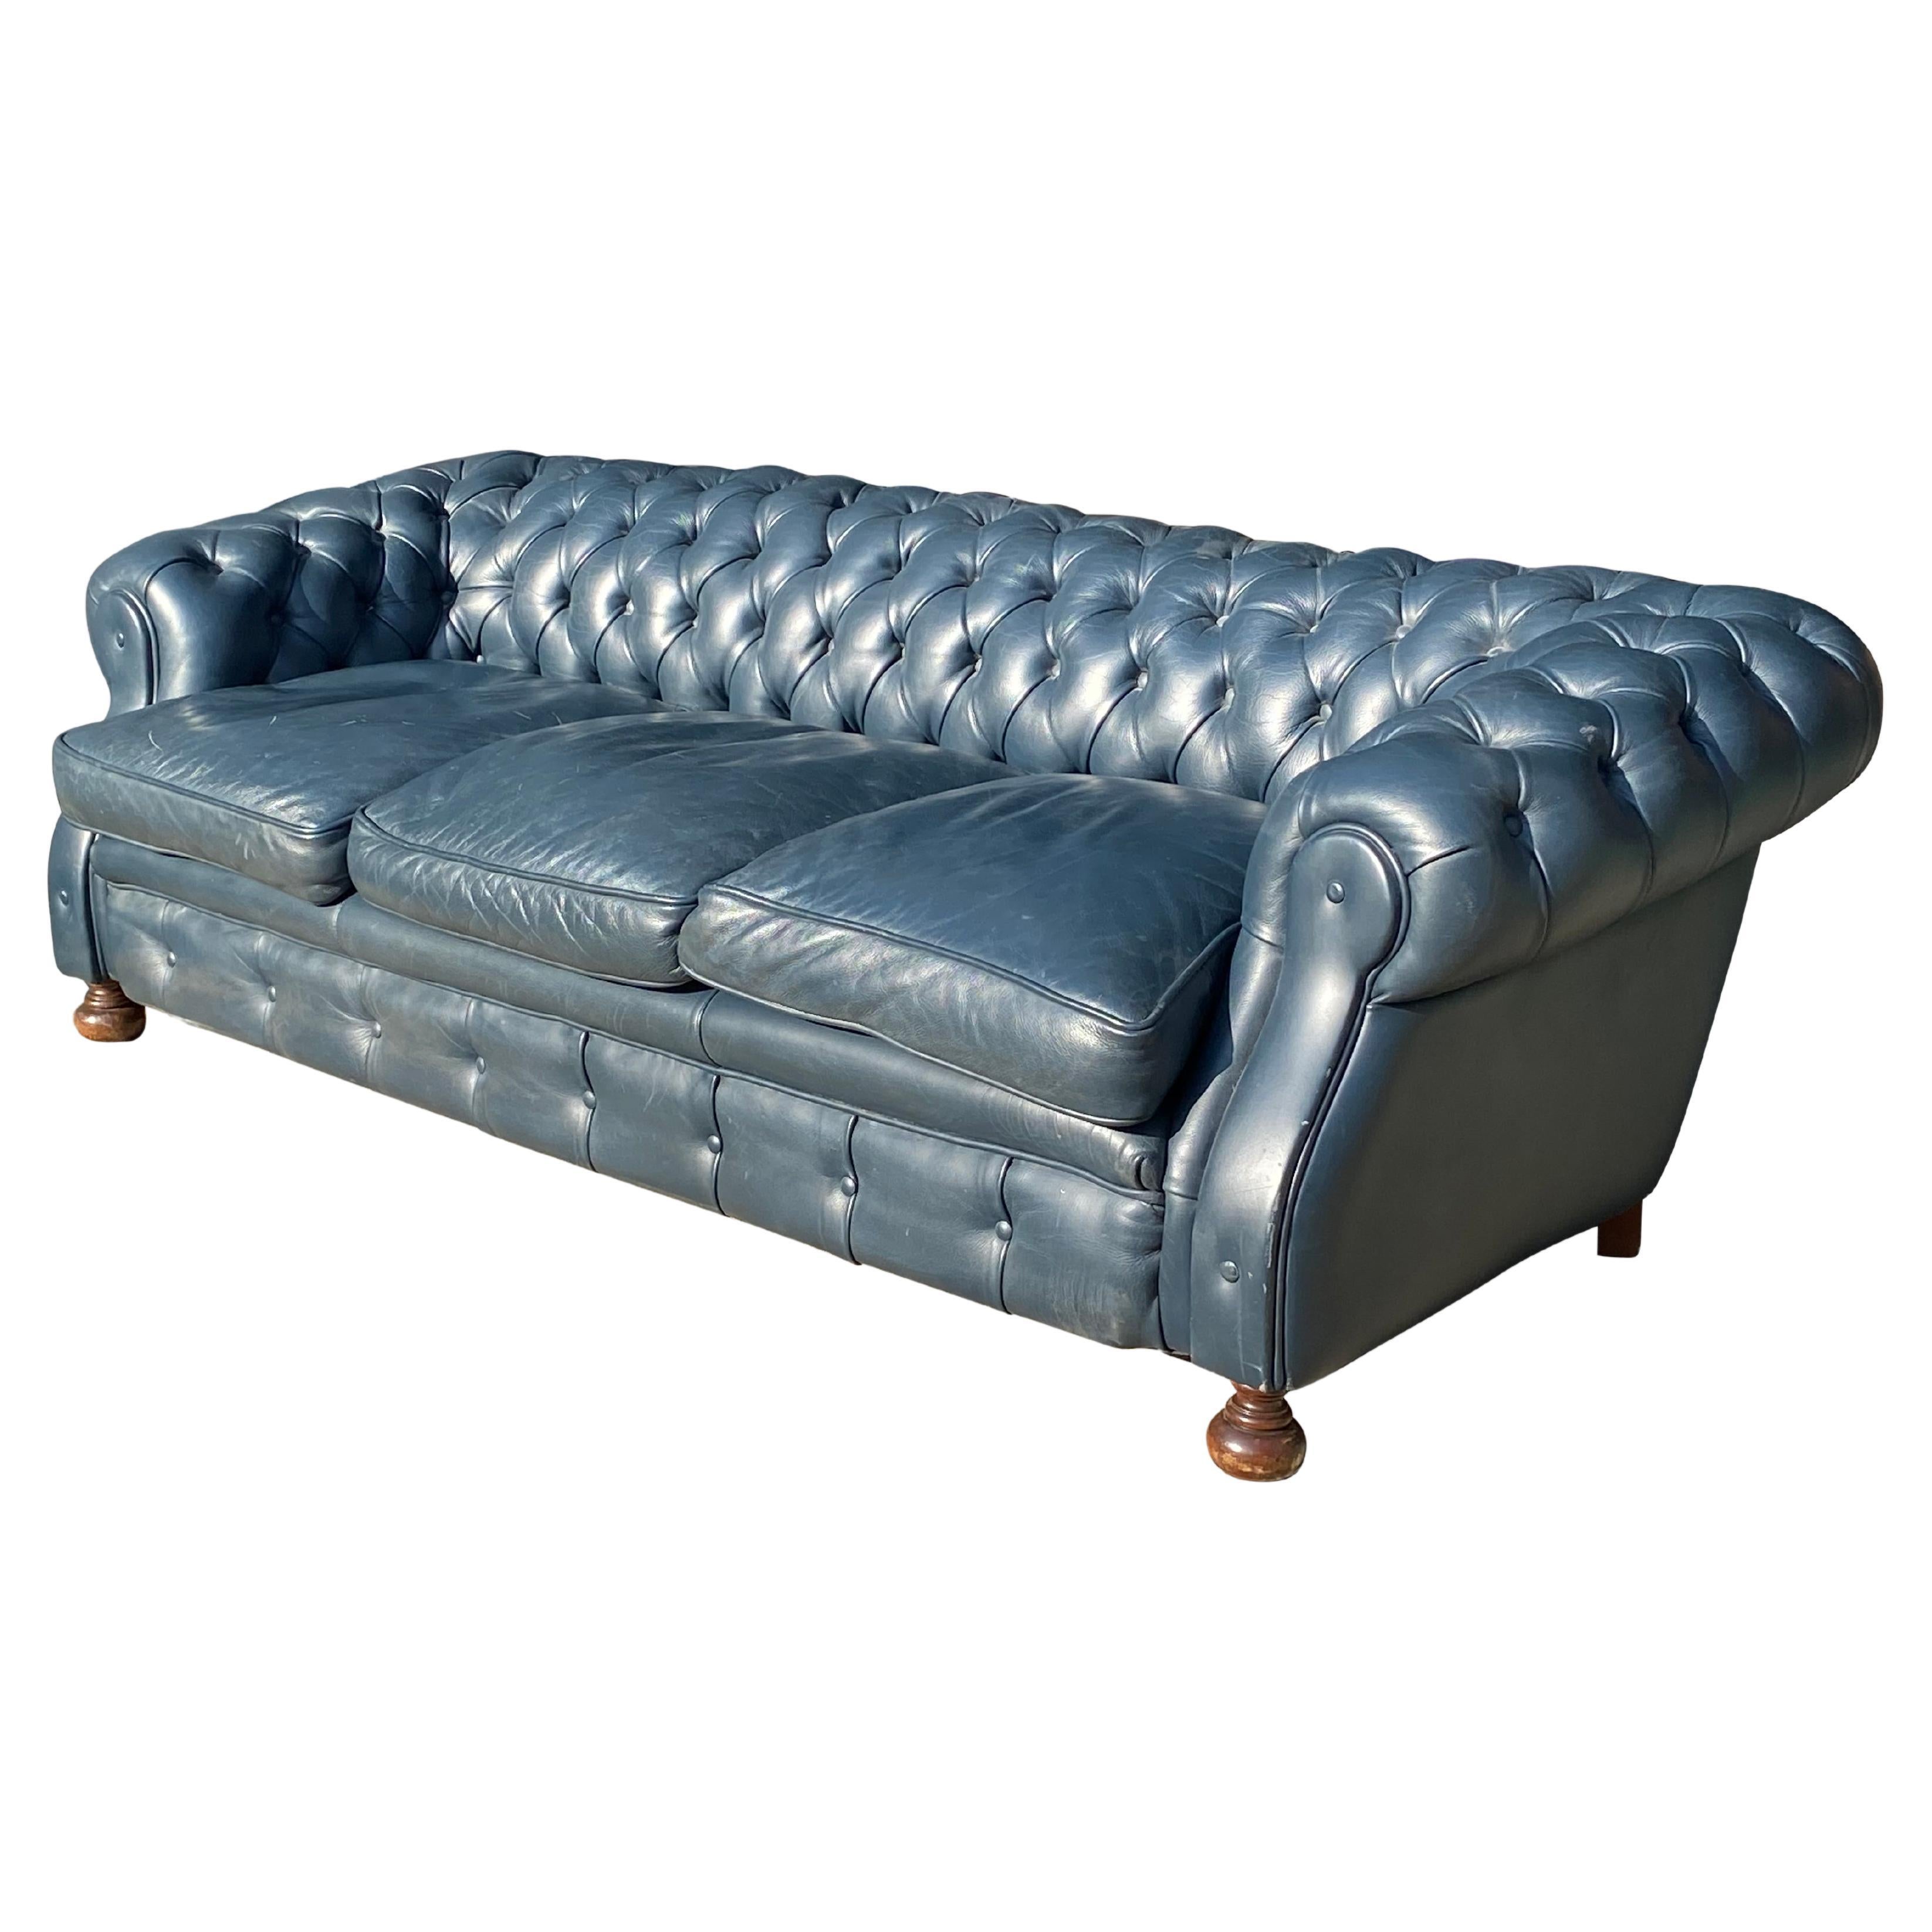 20th Century Stunning Quality Blue Leather 3 Seater Chesterfield Sofa